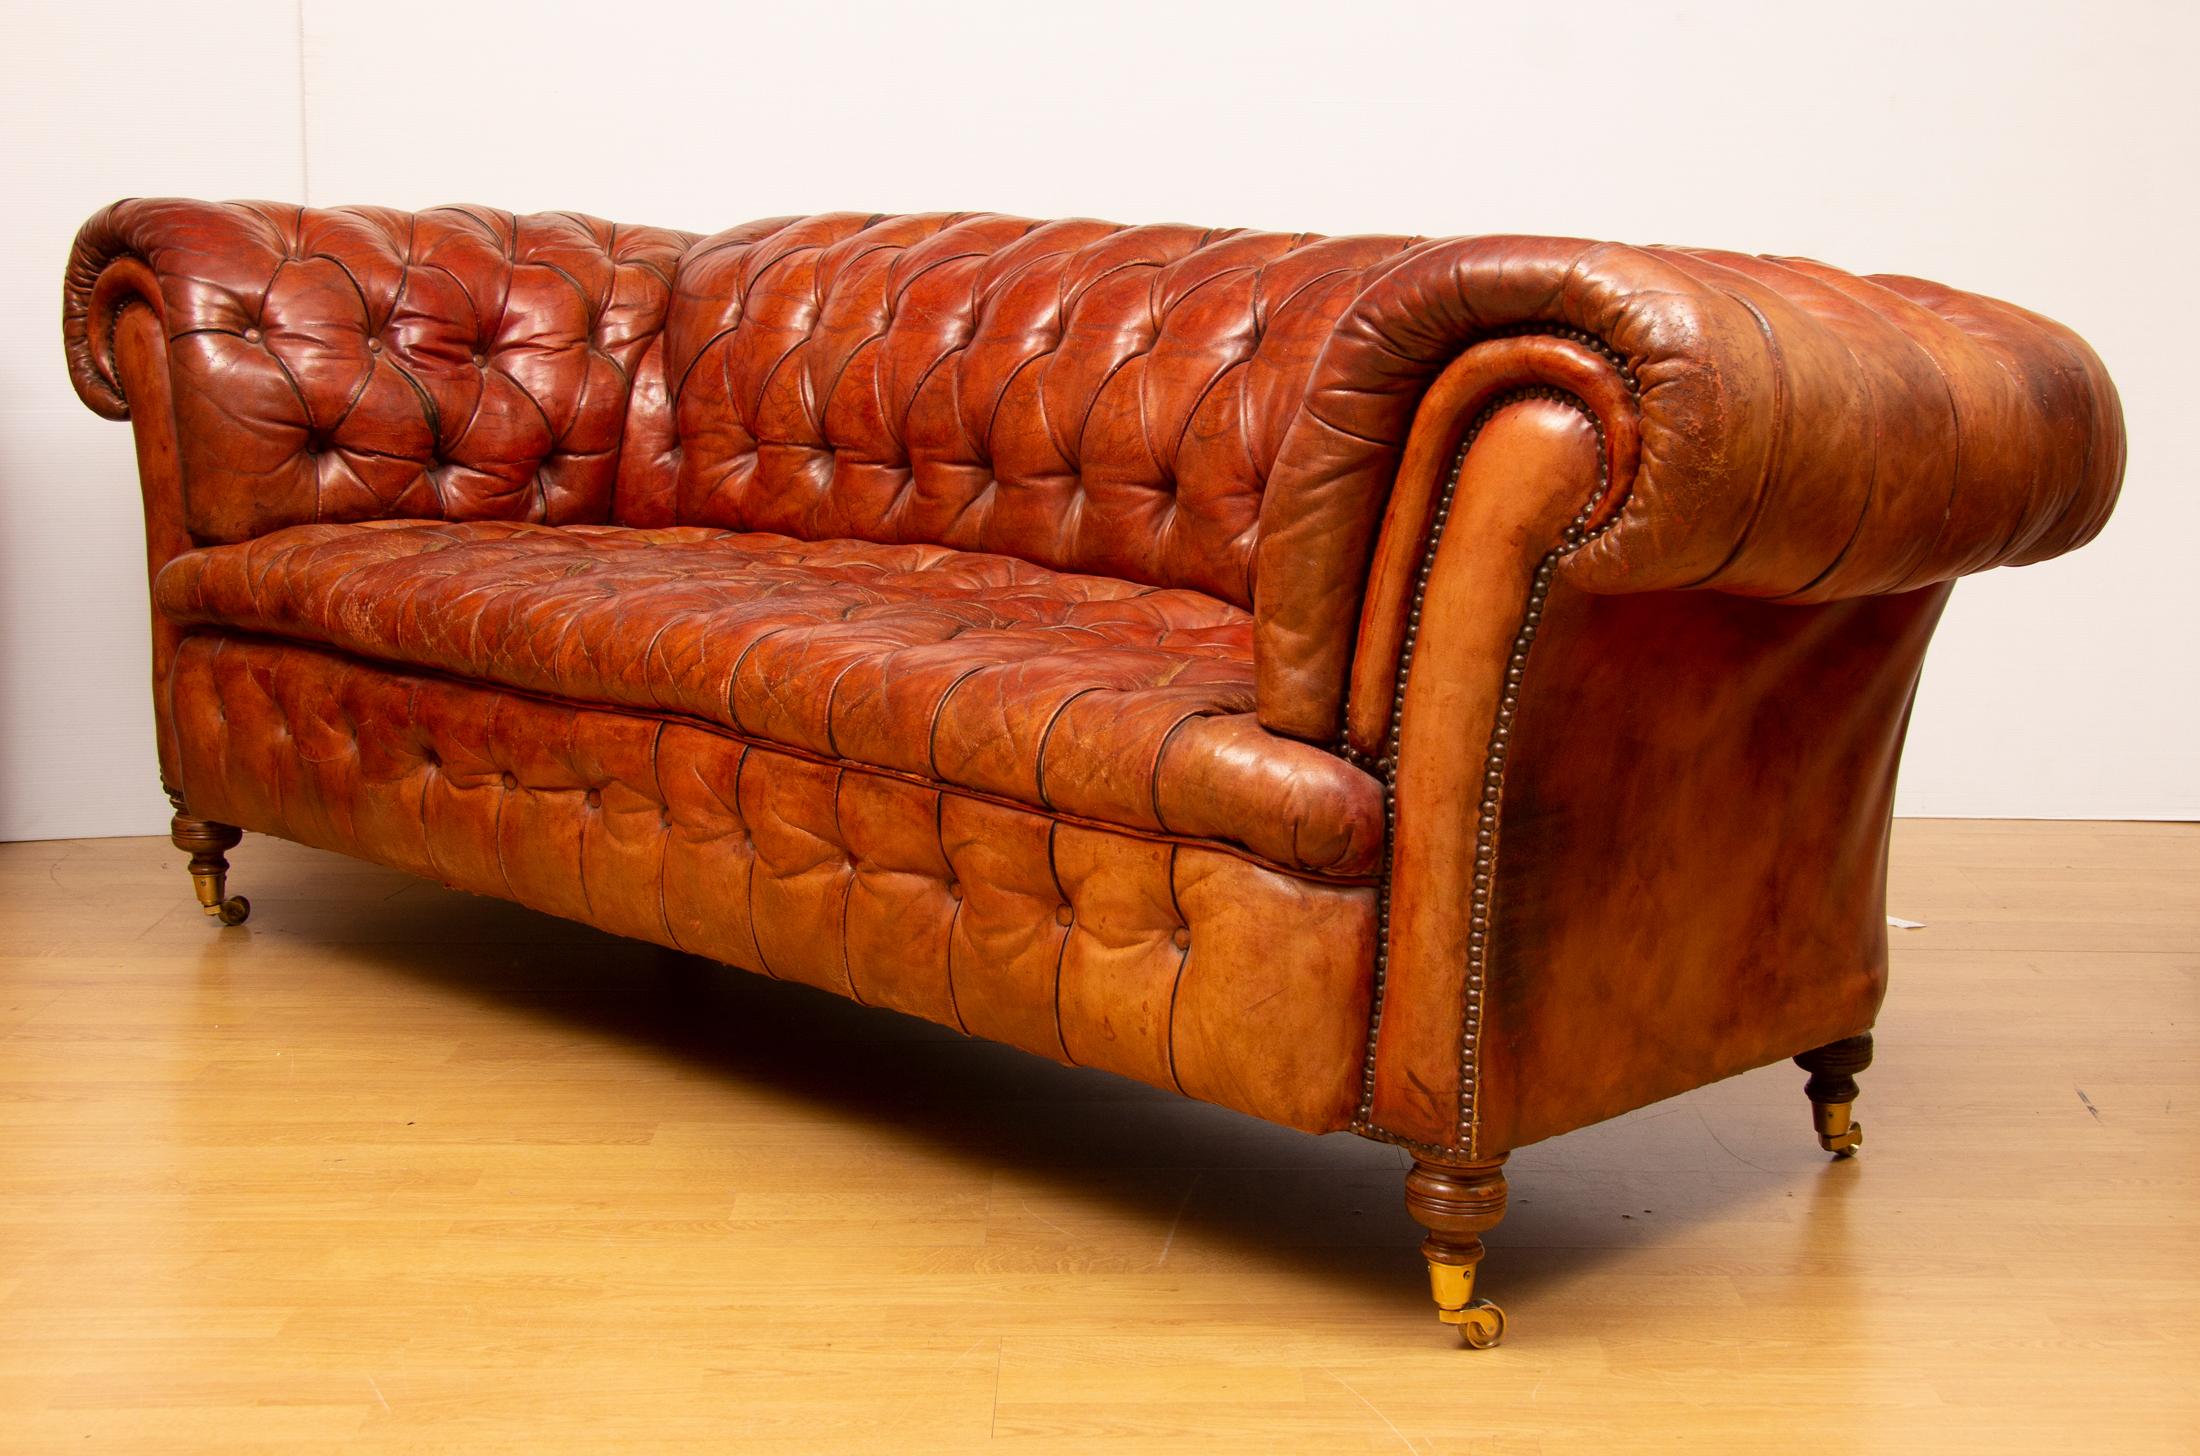 20th century brown leather Chesterfield sofa with buttoned seat on turned legs terminating in brass castors. Sprung interior. Wonderful patina.